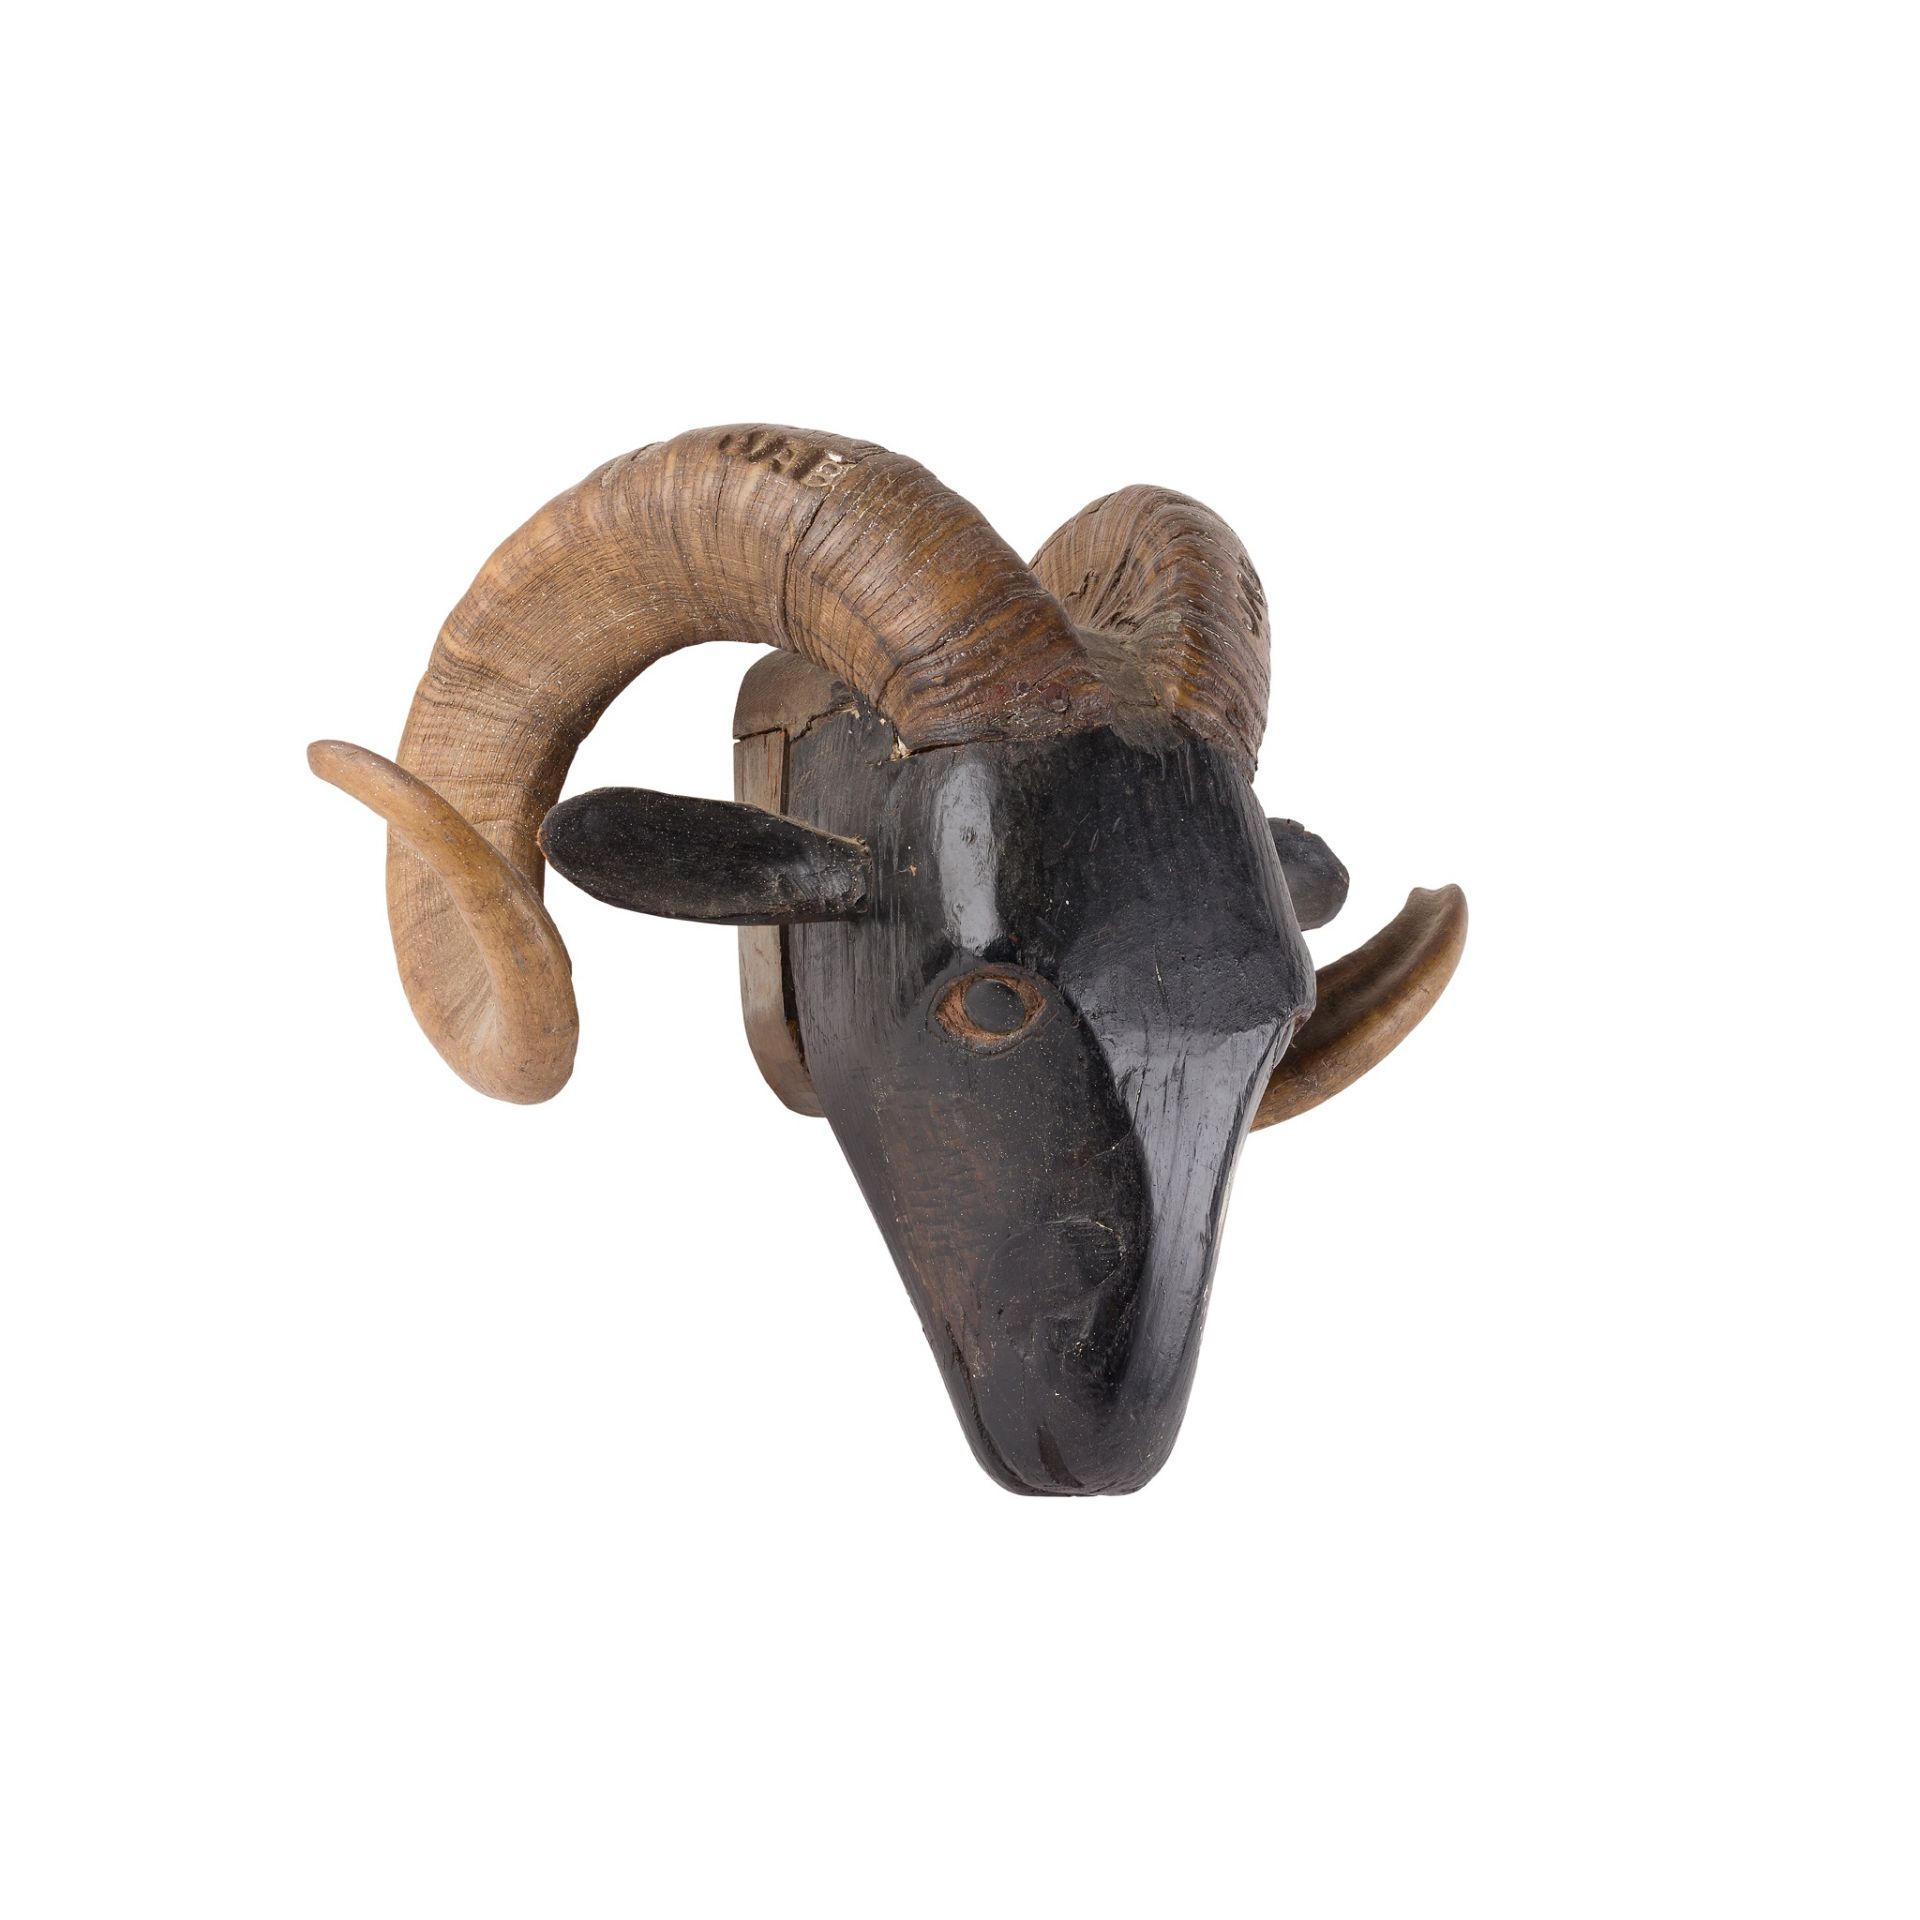 CARVED AND PAINTED WOOD RAM’S HEAD 20TH CENTURY